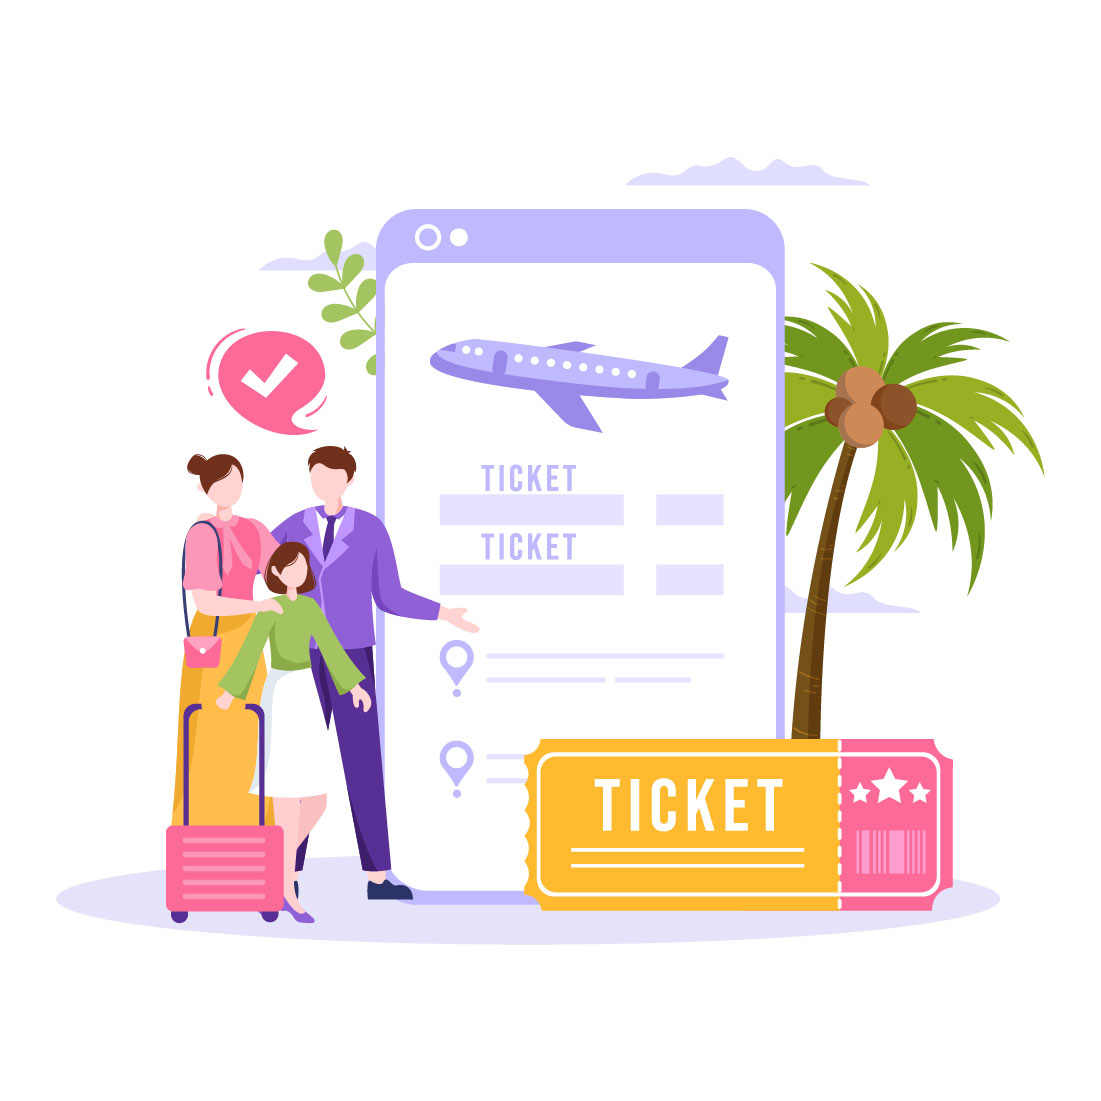 Ticket Travel Online Booking Service Illustration cover image.